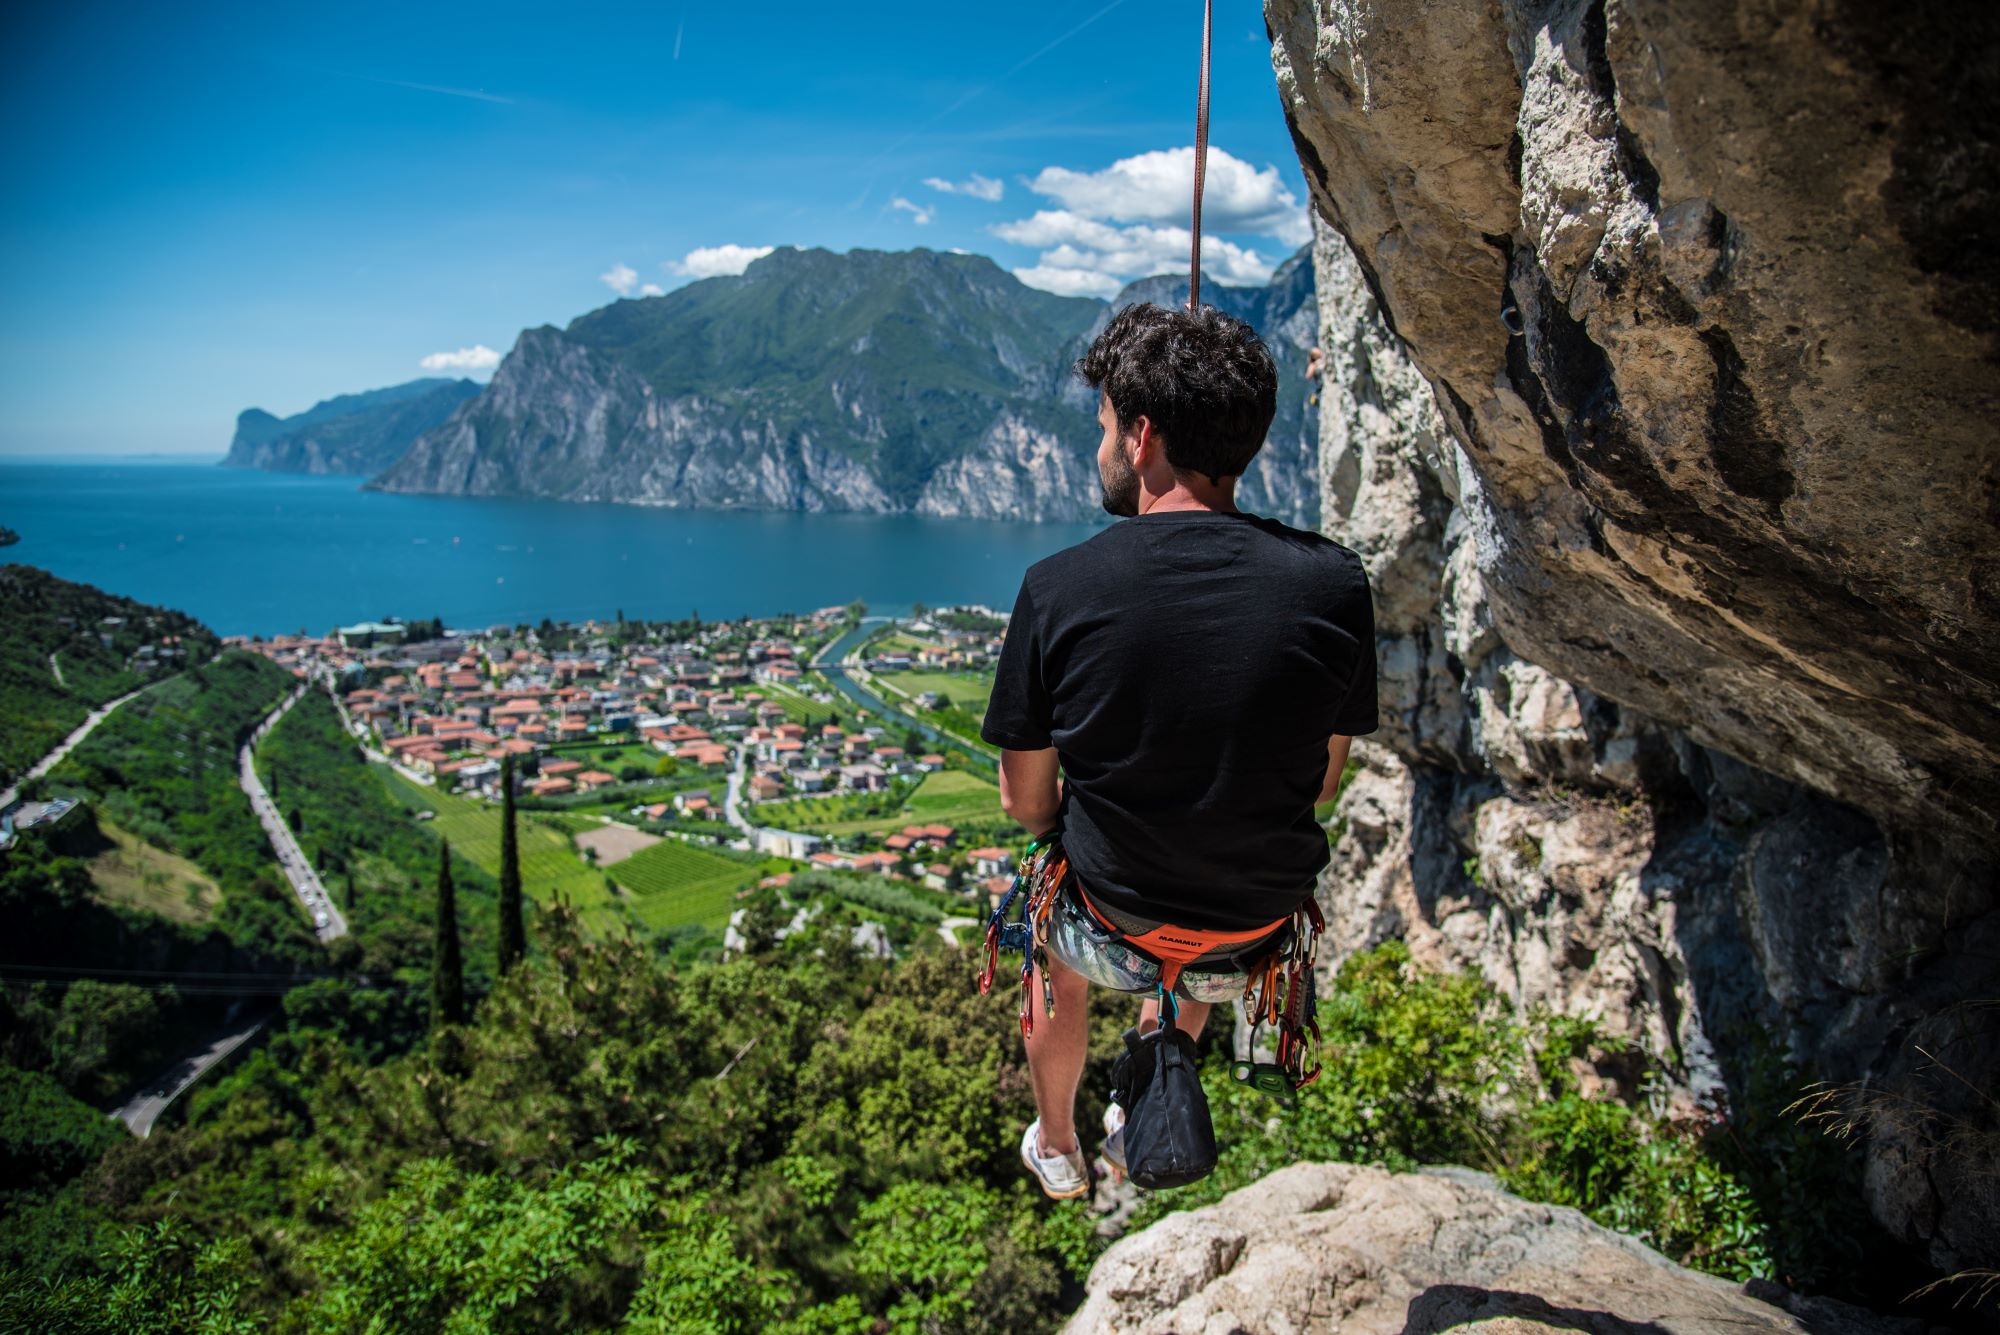 The ideal place to spend your holidays at Lake Garda. An ideal location for enthusiasts of surfing, sailing, mountain biking, or climbing!